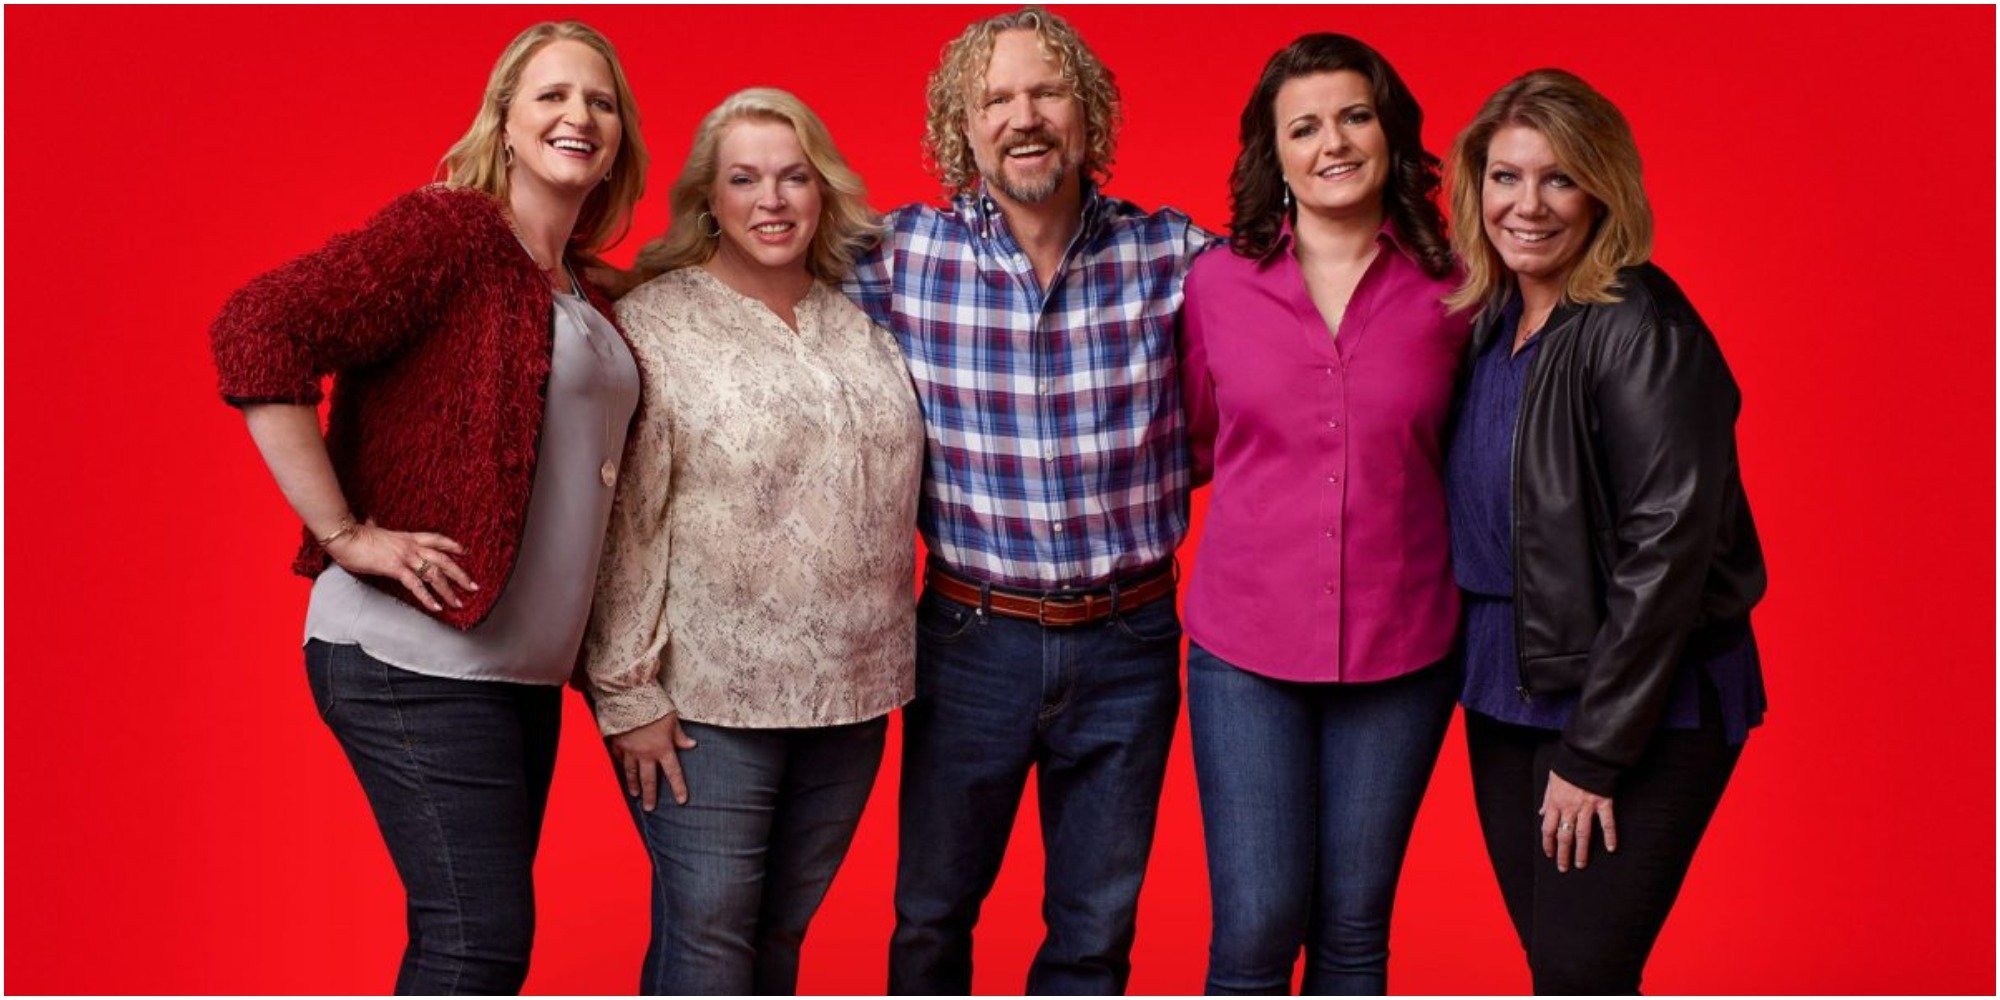 The cast of TLC's Sister Wives.